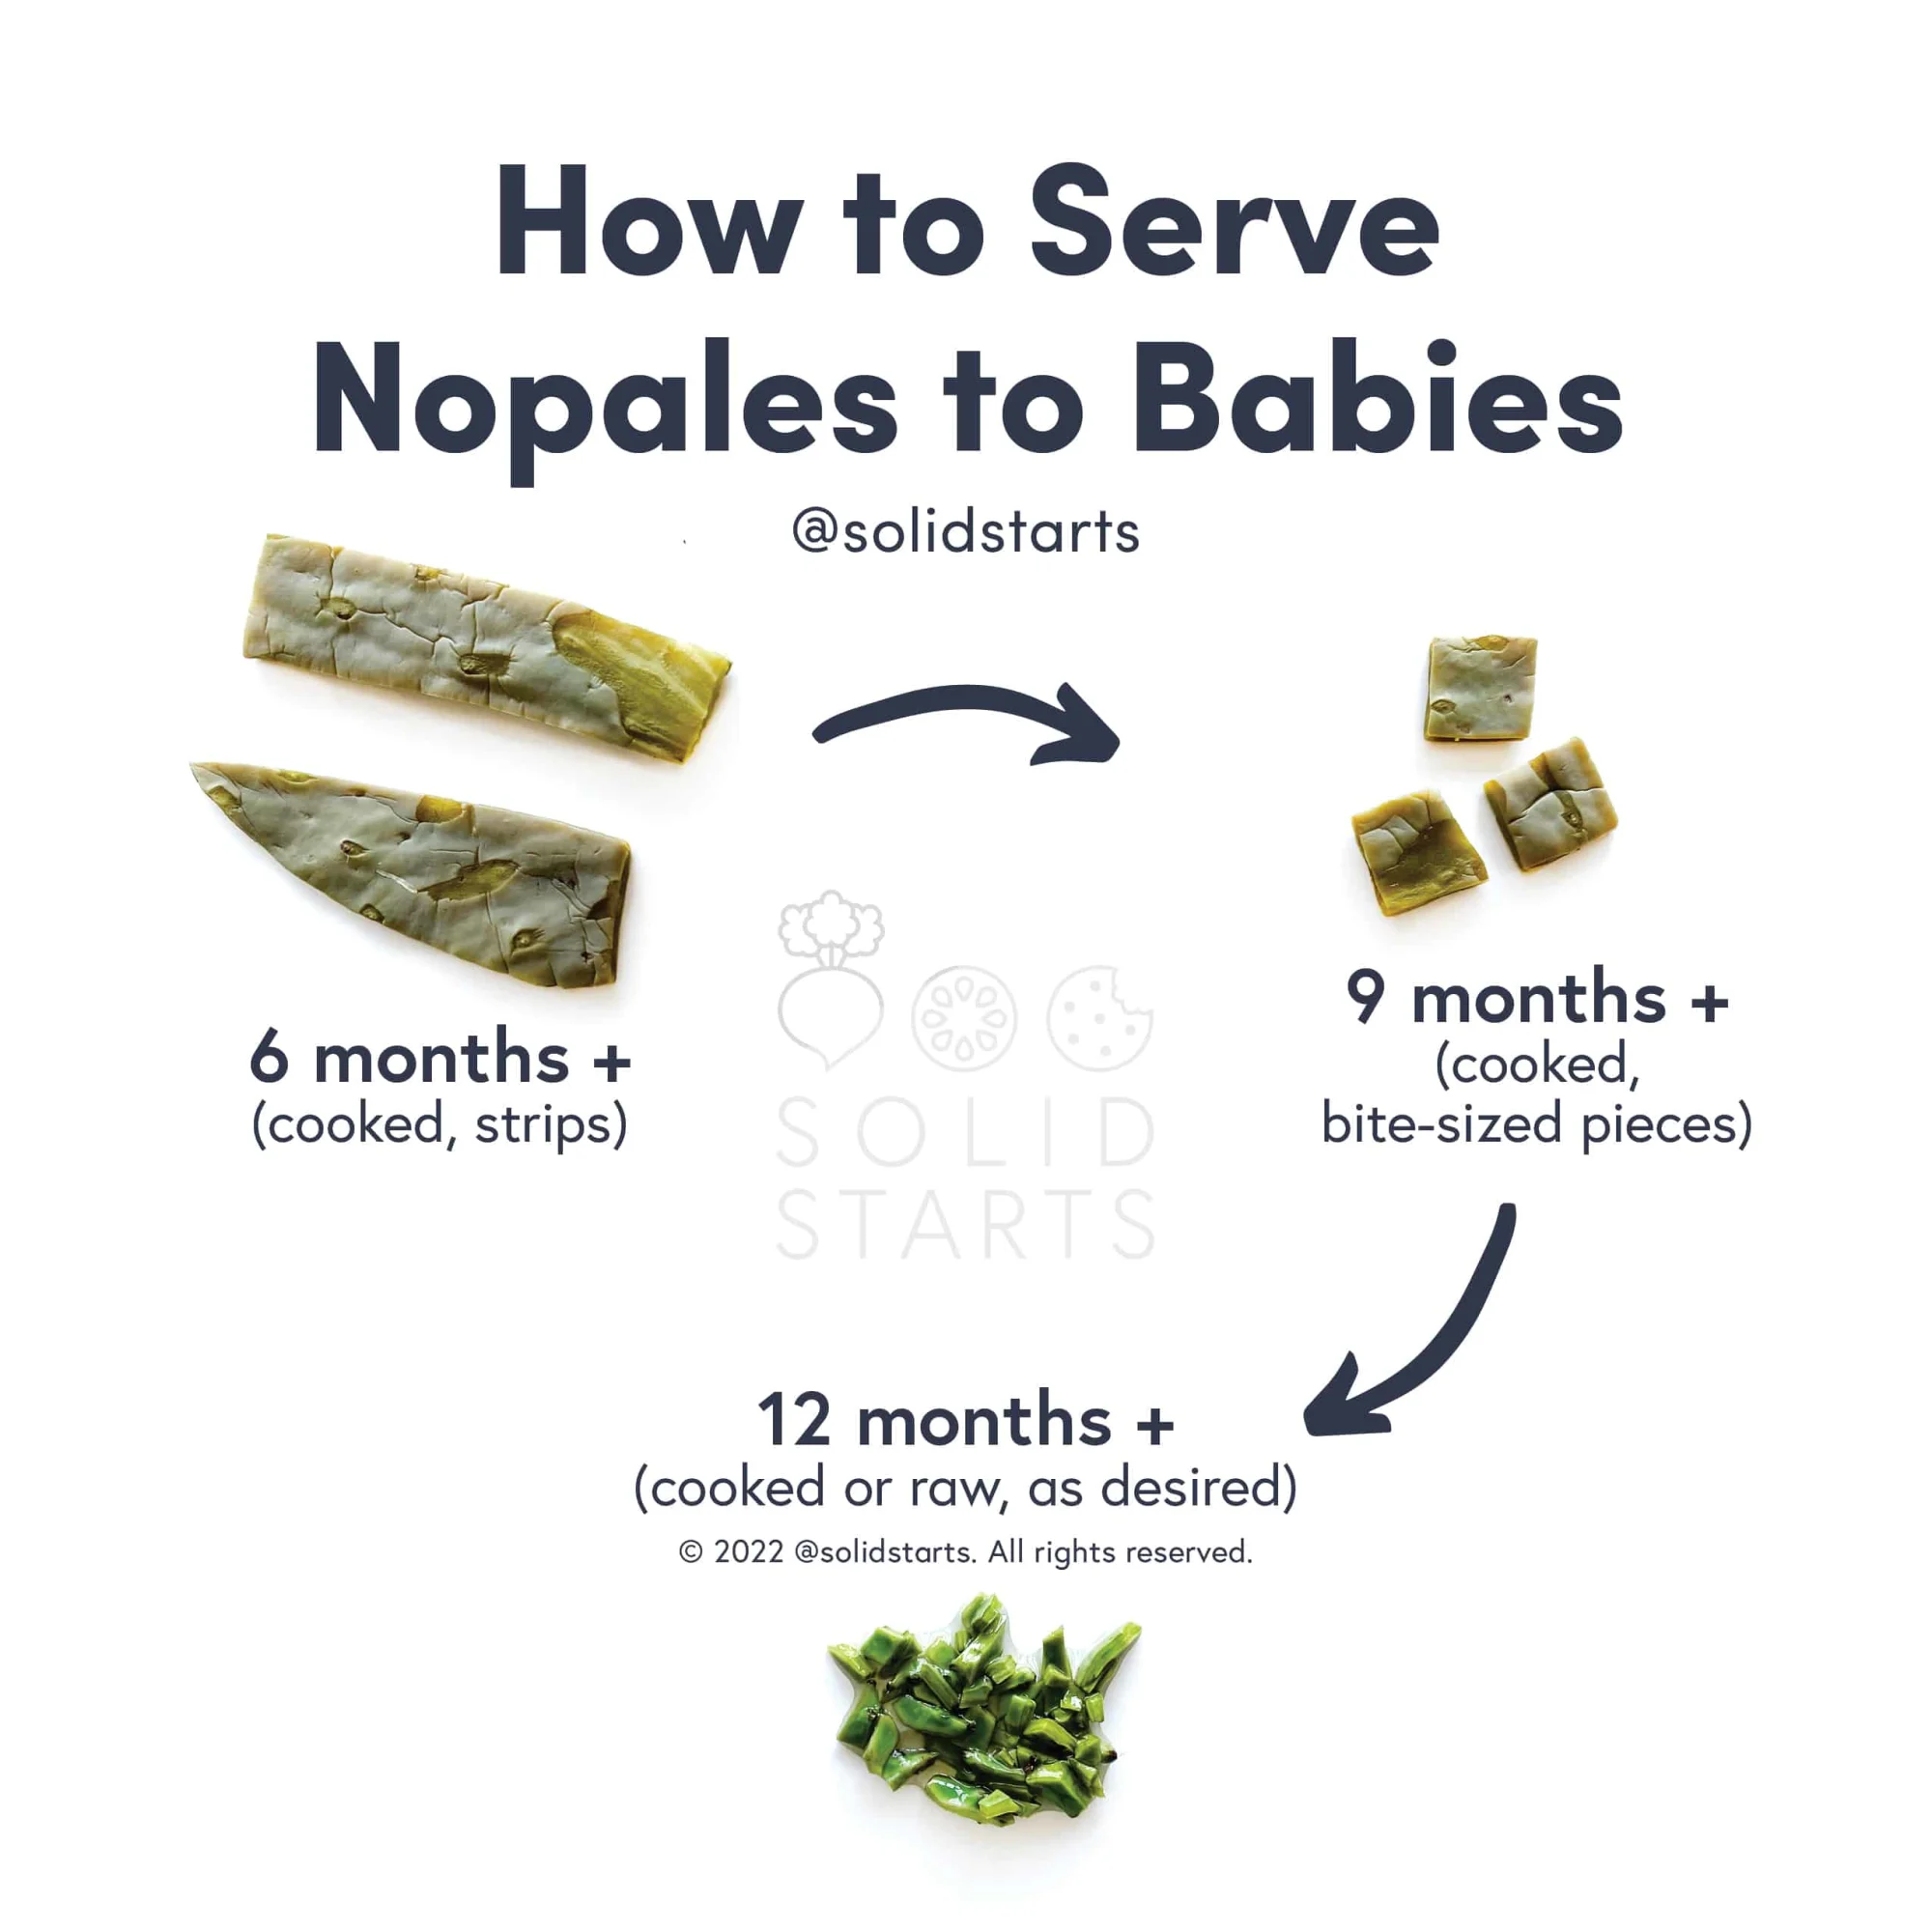 a Solid Starts infographic with the header How to Serve Nopales to Babies: cooked strips for 6 months+, cooked bite-size pieces for 9 months+, and cooked or raw as desired for 12 months+